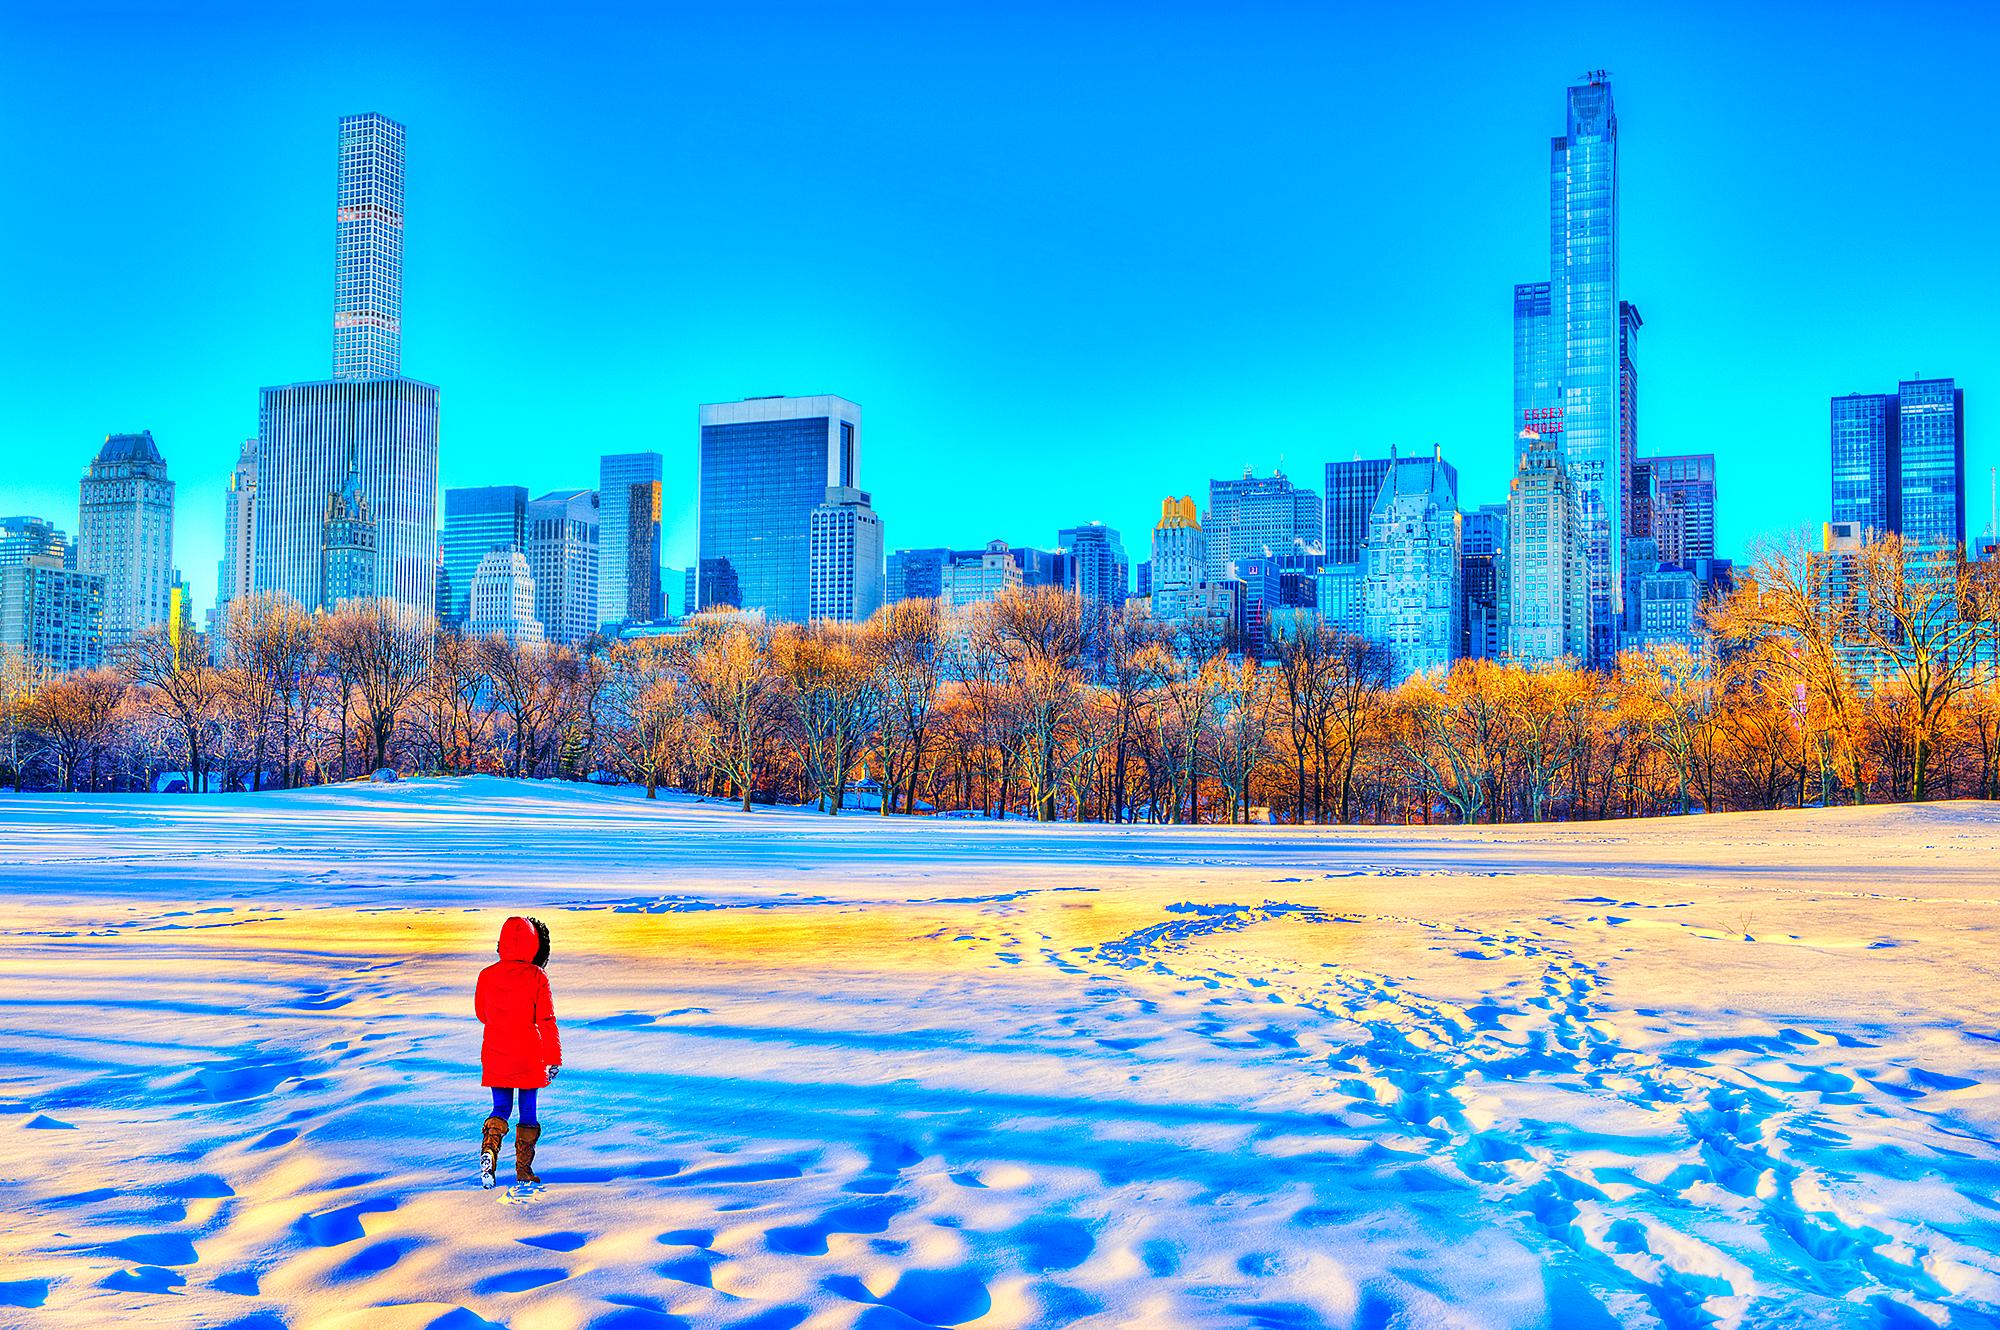 WARM Lights of Sunrise After Snowstorm In Central Park, New York City (en anglais seulement)